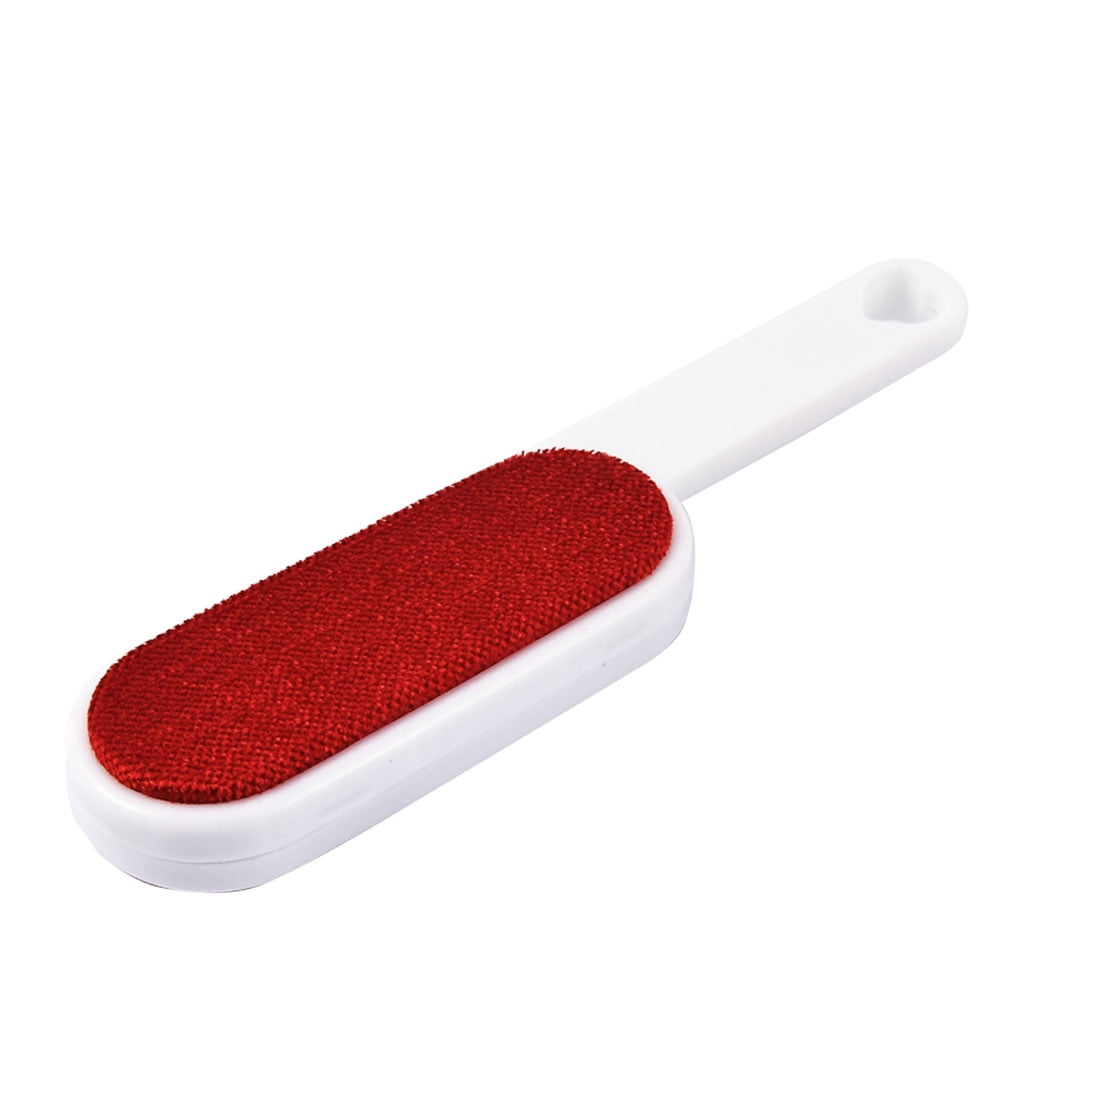 Clothes Care Brush. Coats Fluff Pet Hair Remover Natural & Nylon Cloth Brushes 